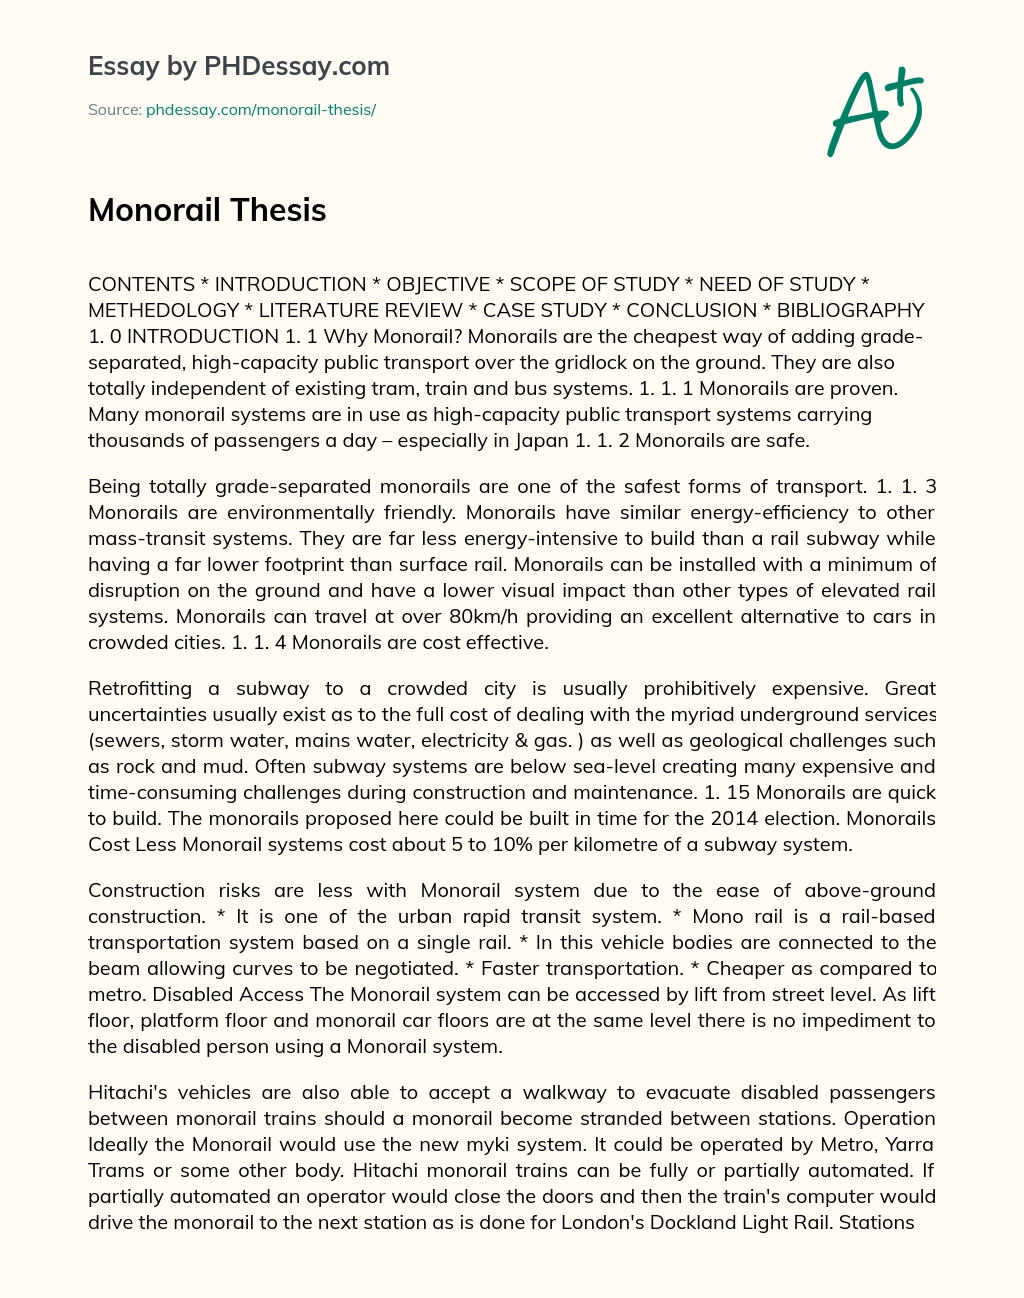 Monorail Thesis essay